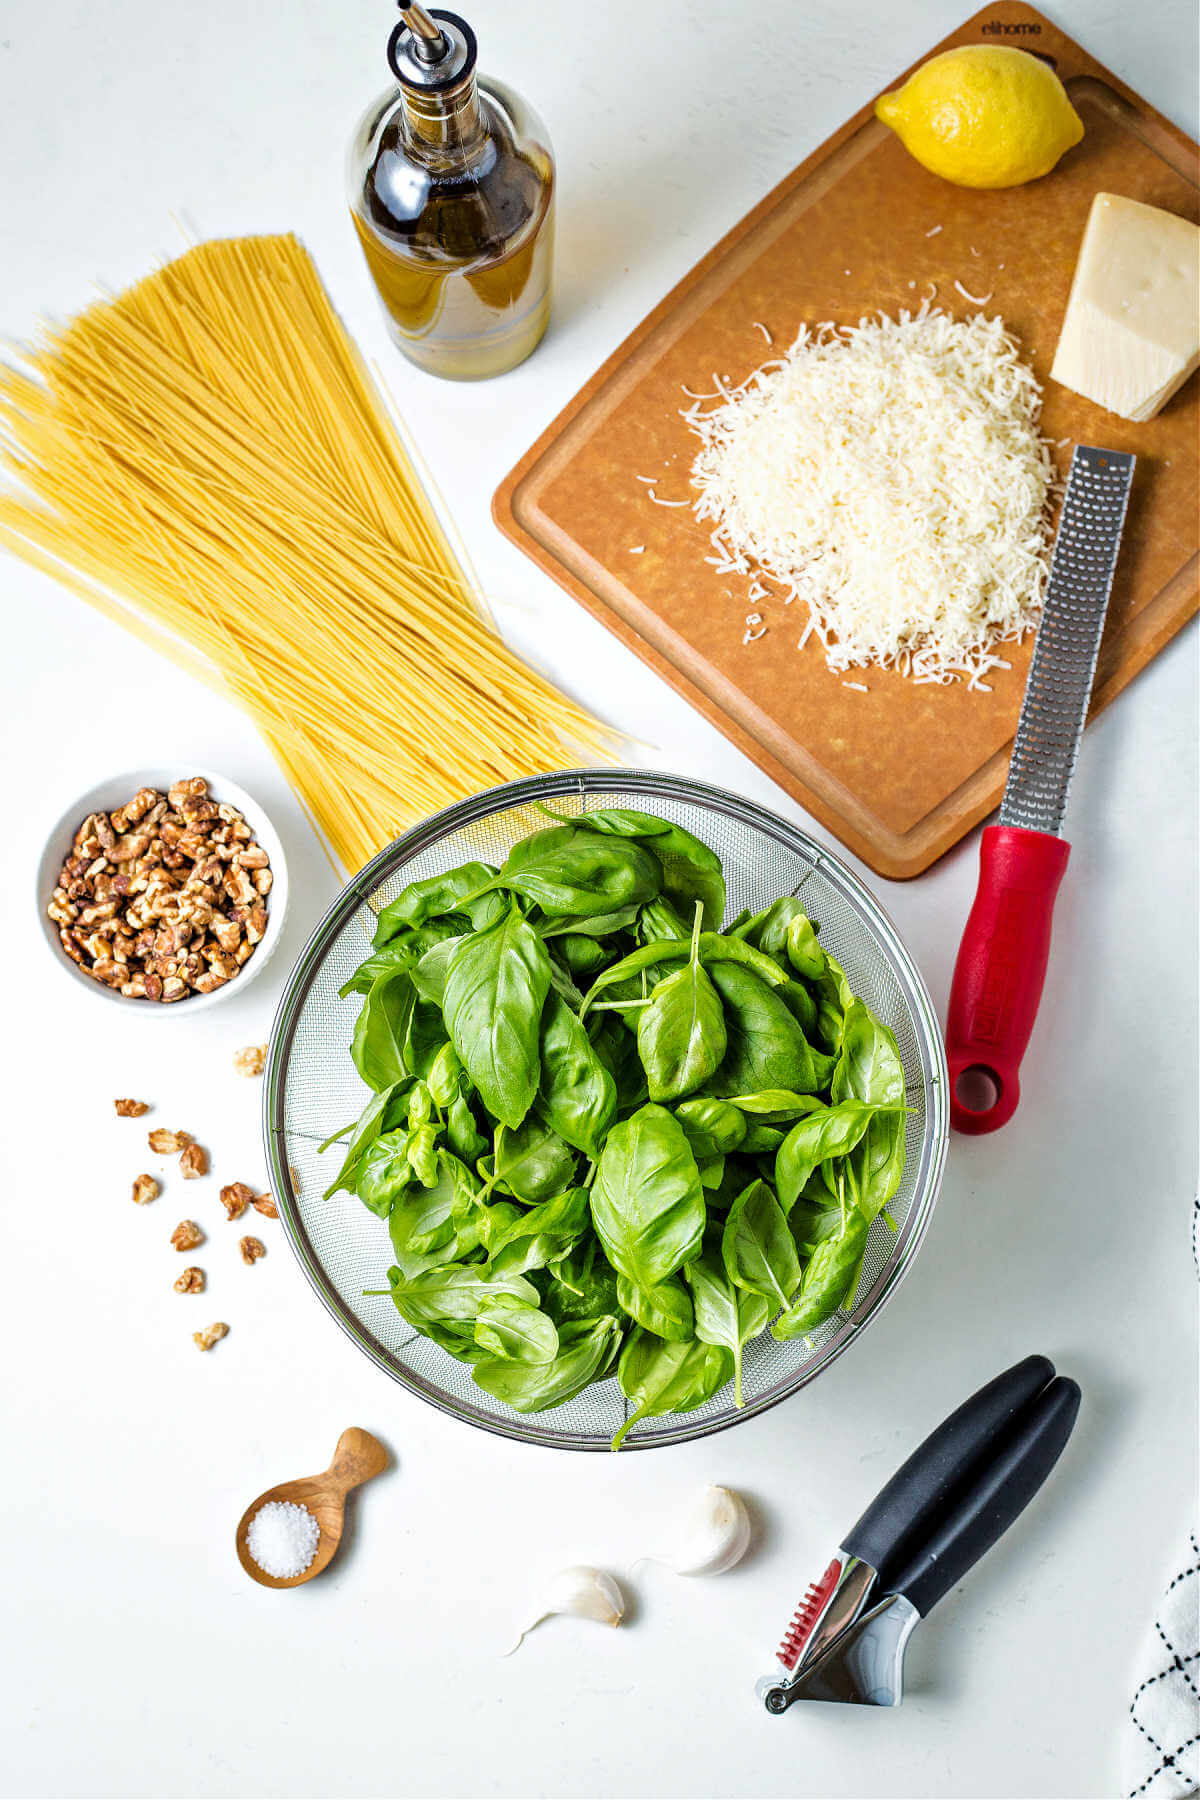 ingredients for making basil pesto pasta on a table.